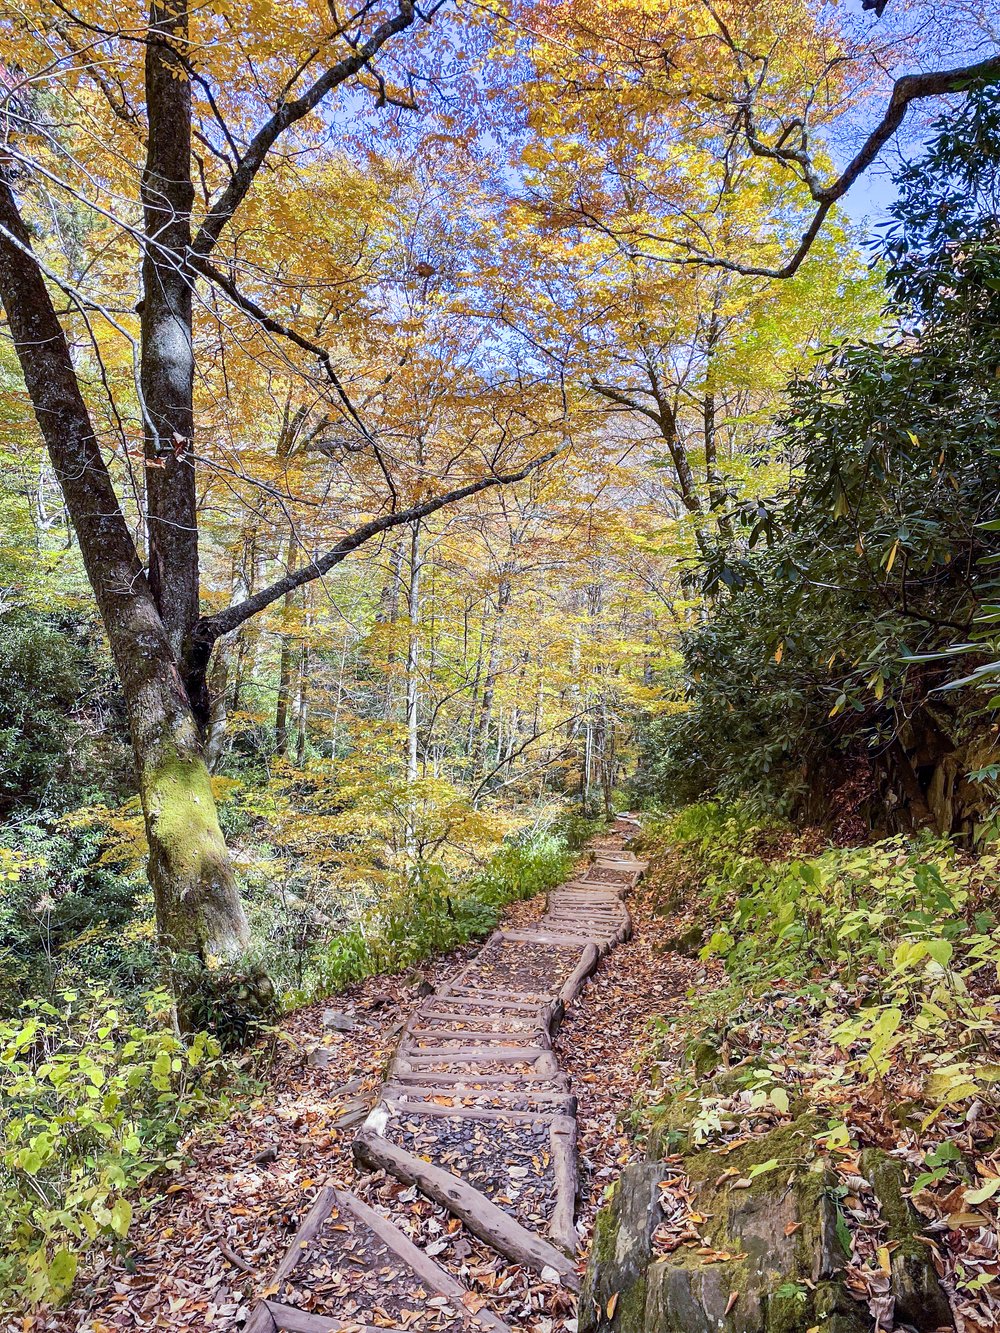  Wooden steps created and maintained by the park and local volunteer group Friends of the Smokies ensure trails are more accessible to novice hikers and reduces erosion along the paths. Image credit: Jeffrey Rose, edits by Rachel Lense for The Scienc